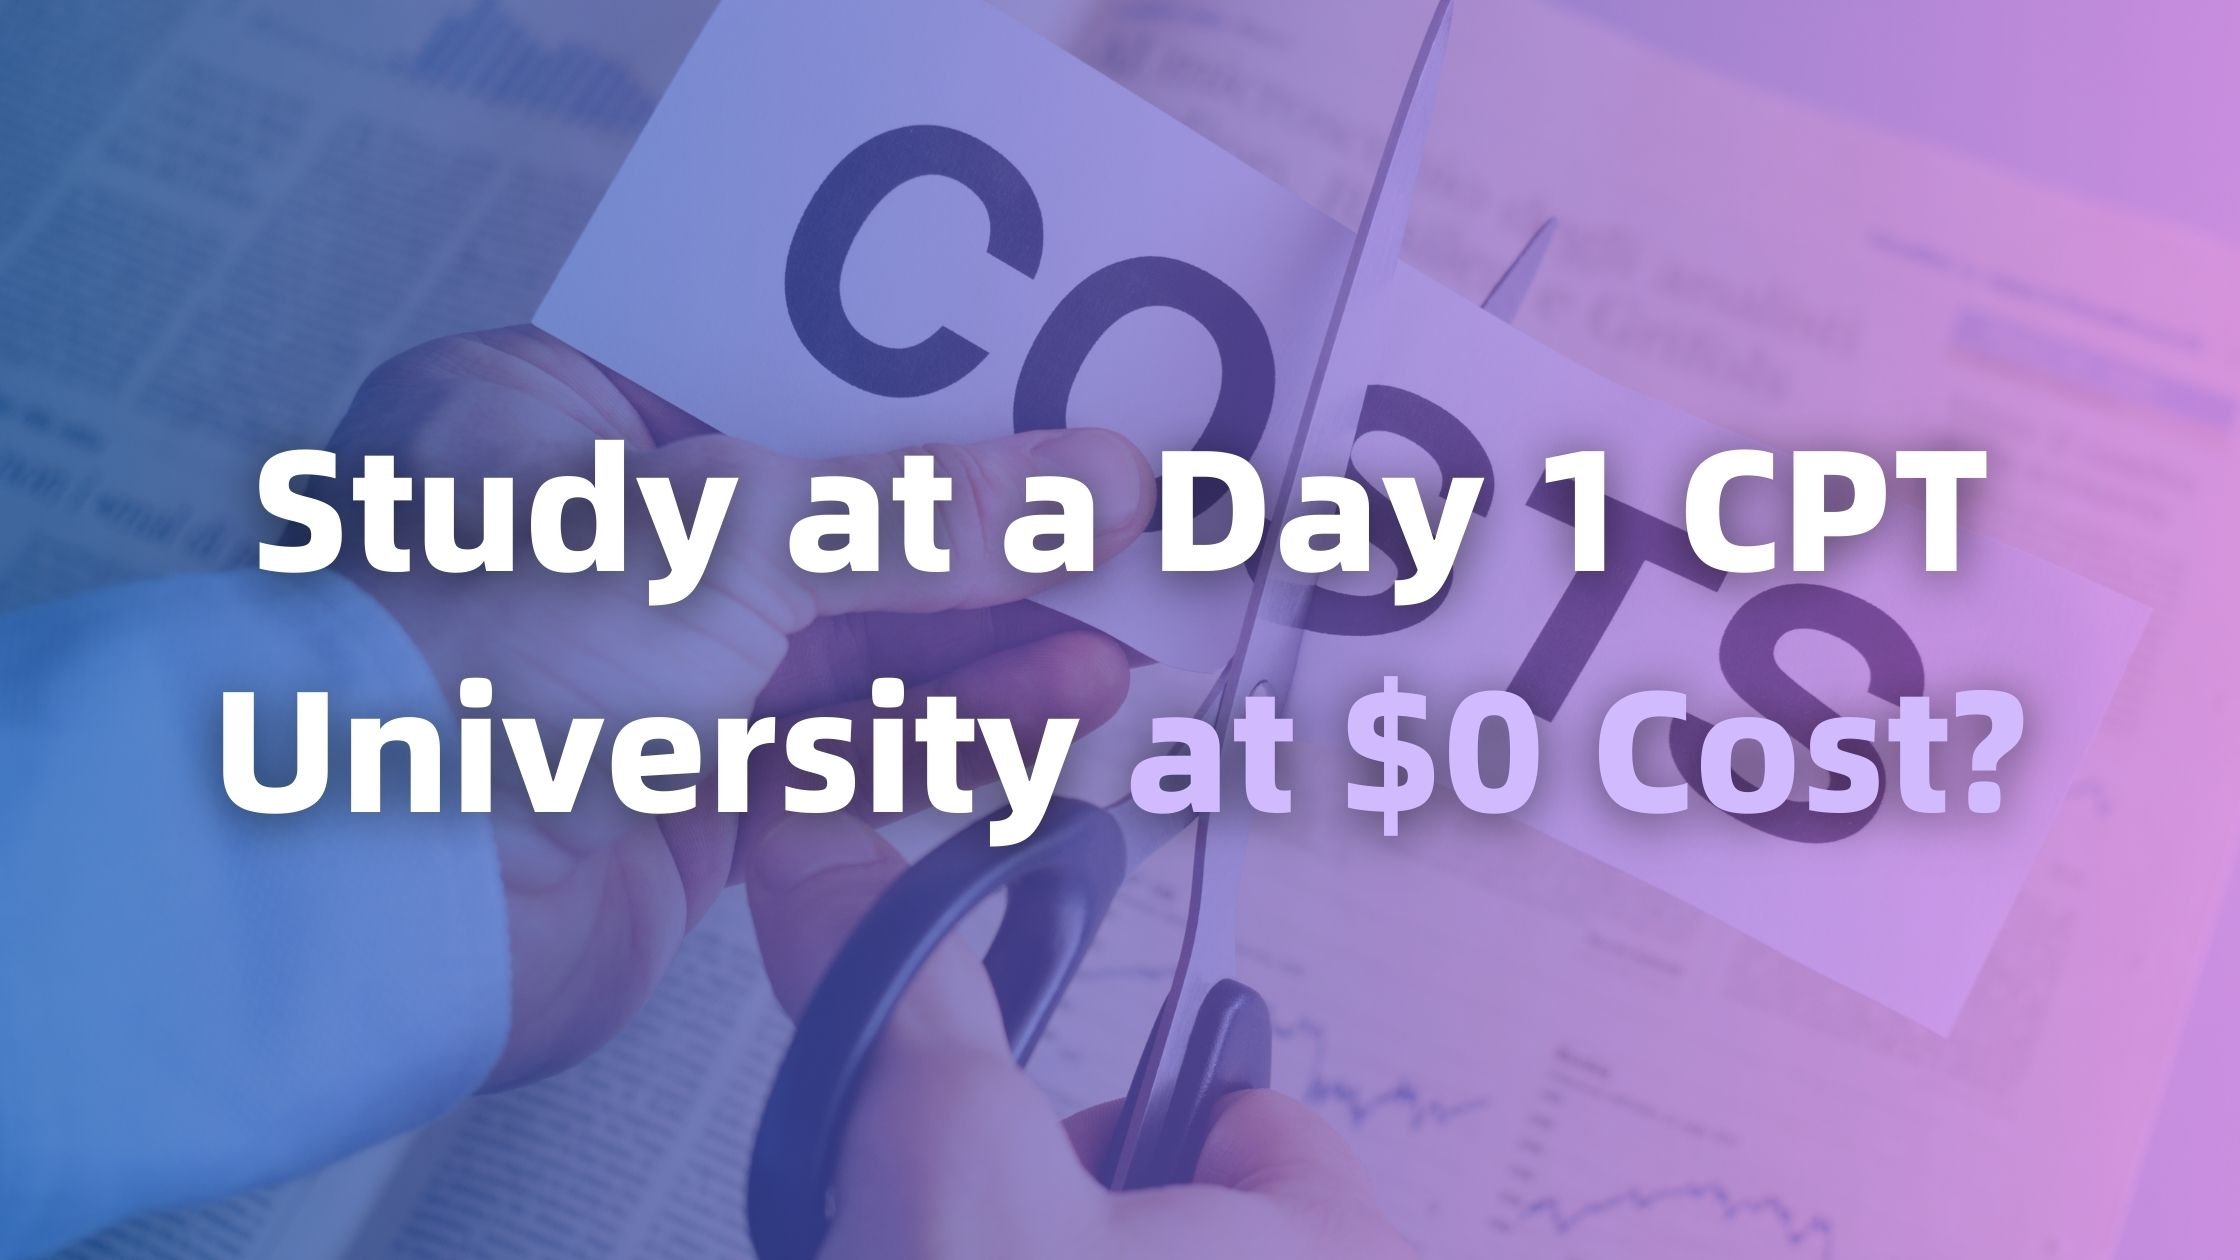 Study at a Day 1 CPT University for free